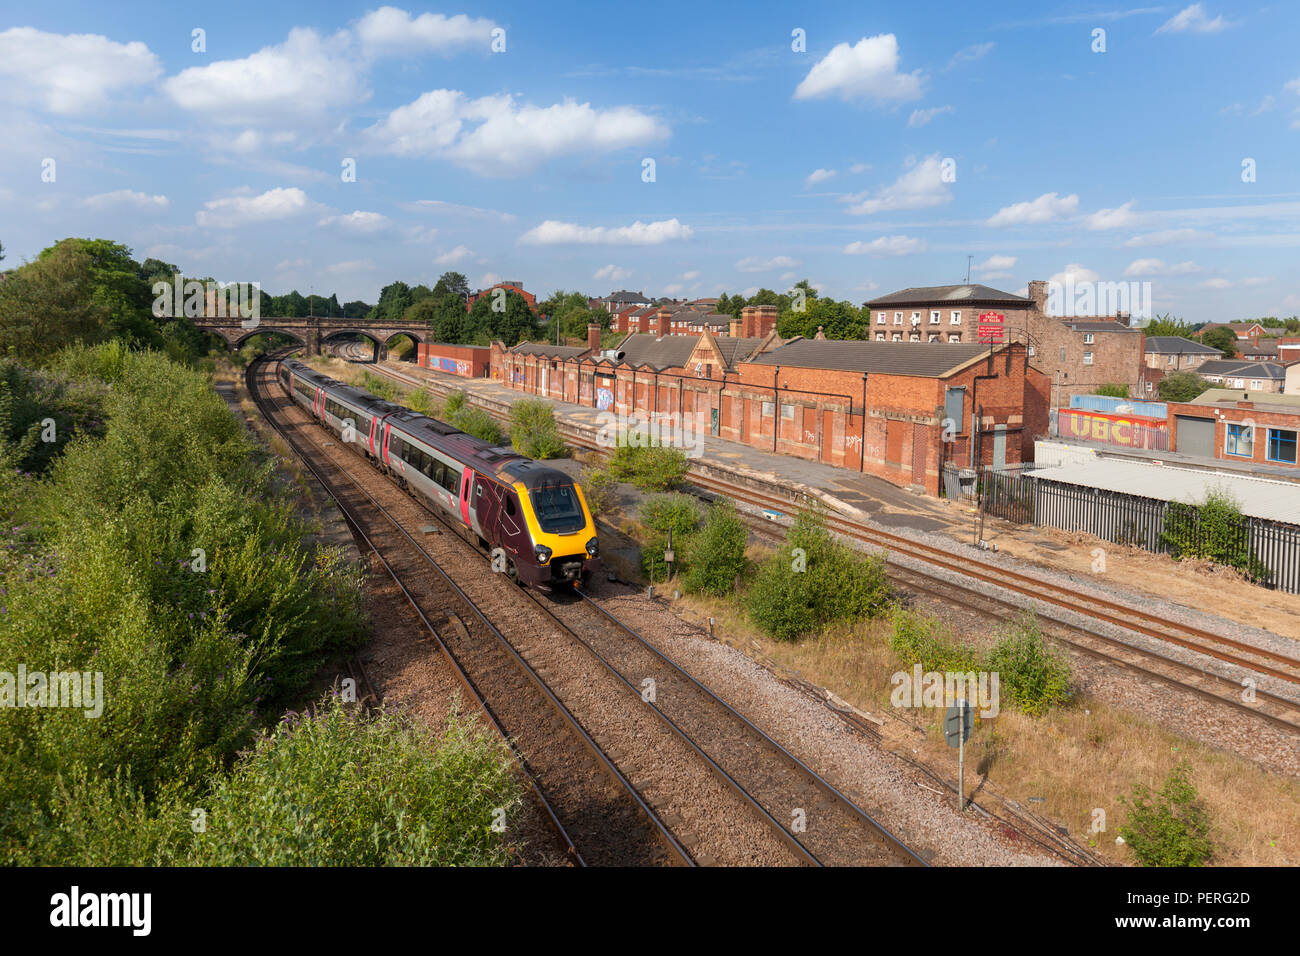 A Crosscountry Trains class 220 voyager train passing the derelict closed railway station at Rotherham Masborough Stock Photo